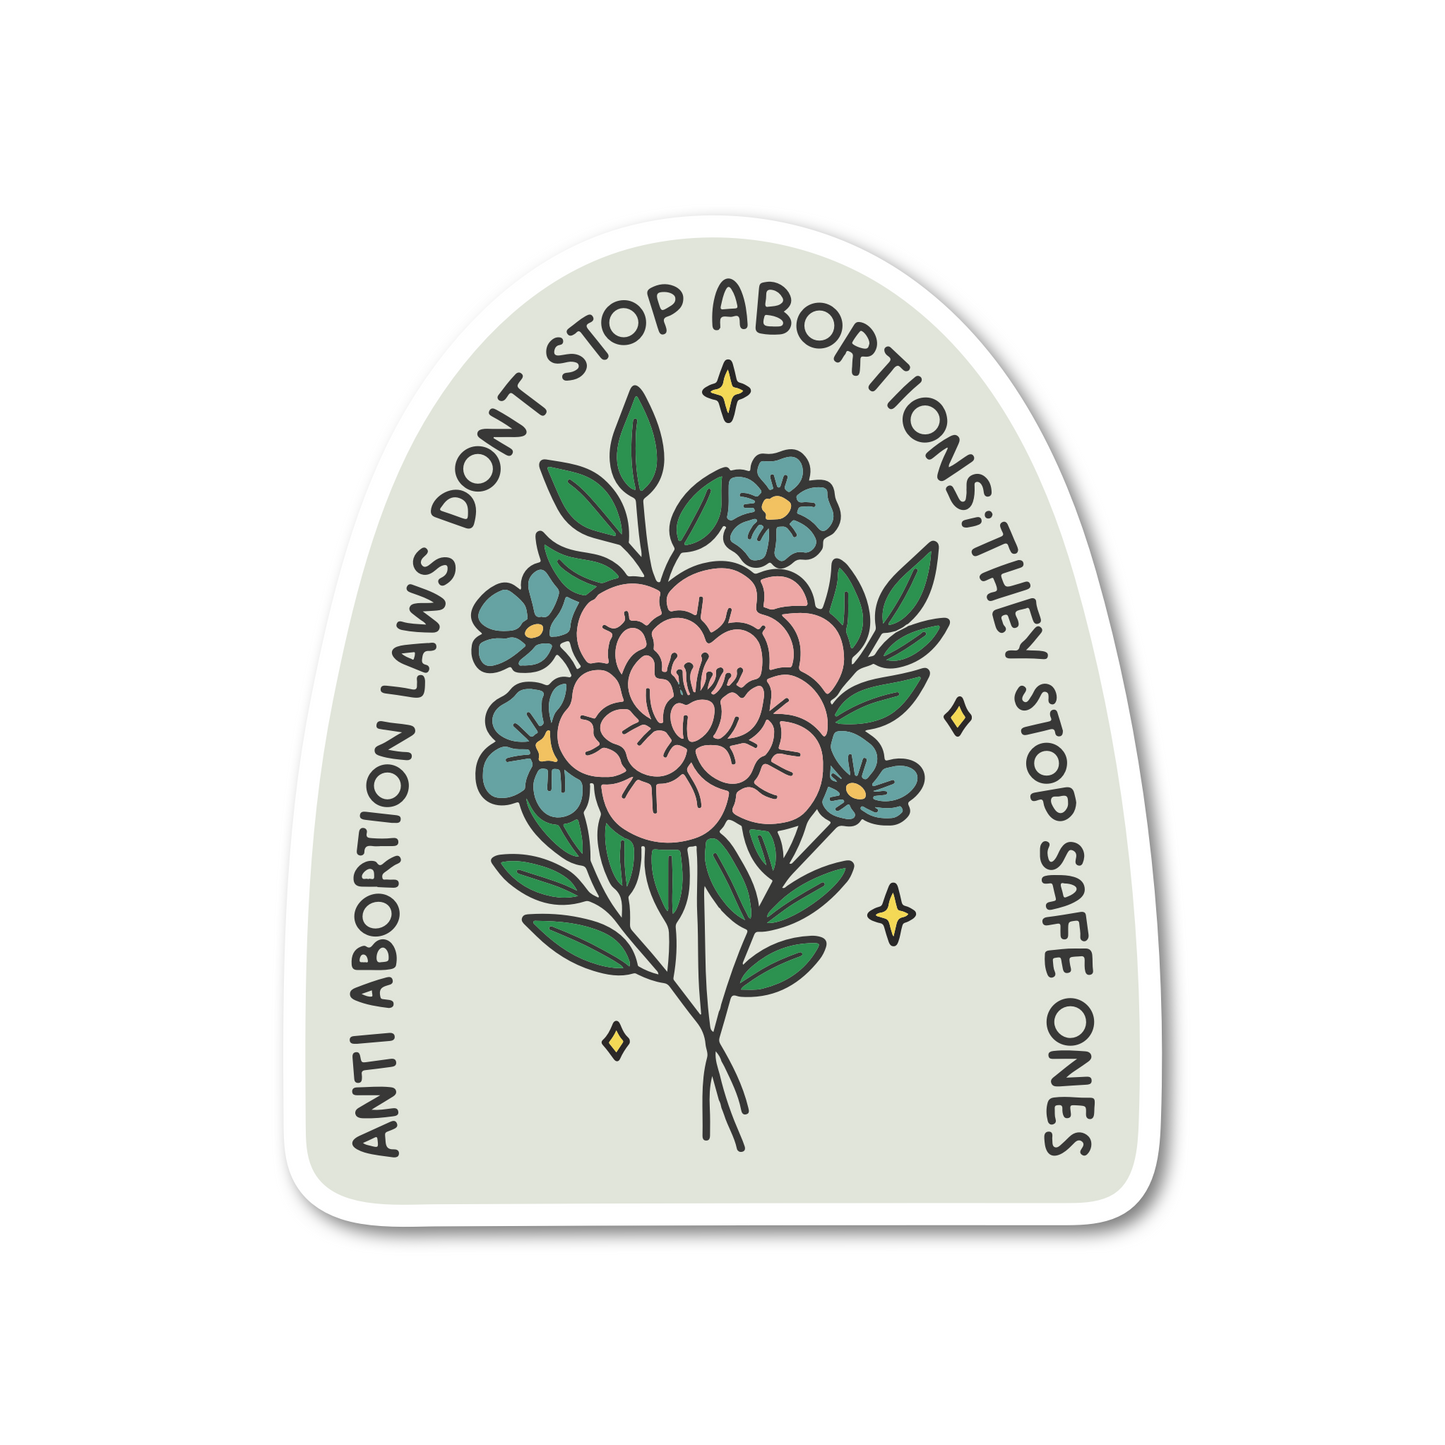 Laws Don't Stop Abortions Women's Rights Sticker